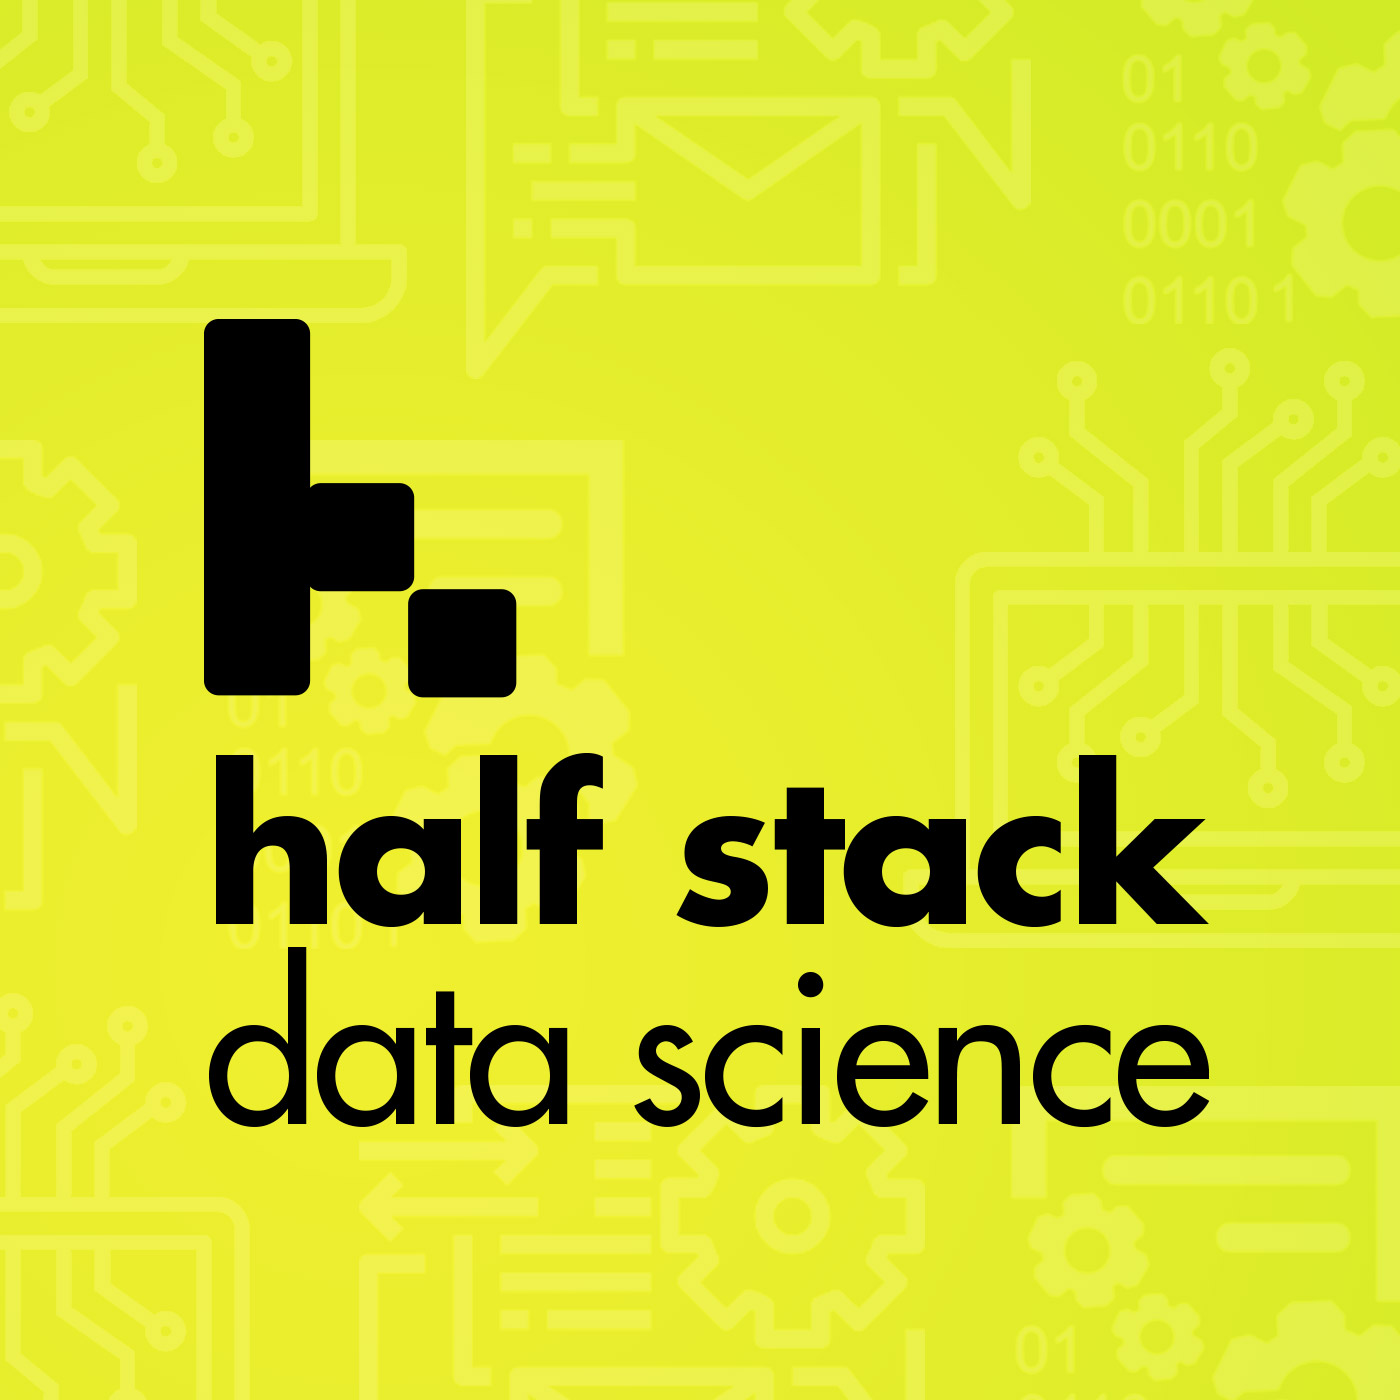 Logo for the Half Stack Data Science podcast by David Asboth and Shaun McGirr